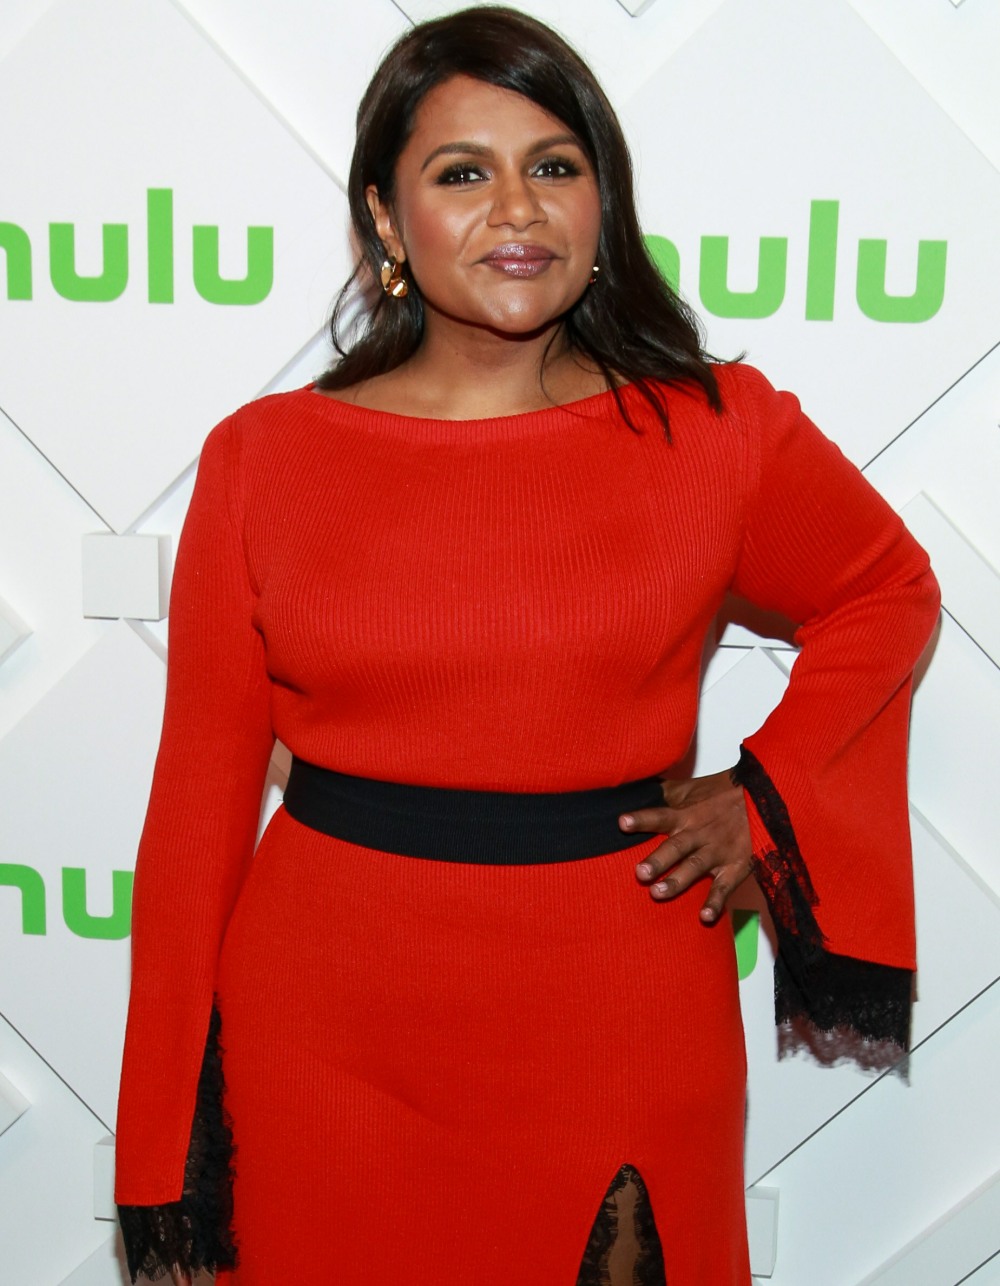 Mindy Kaling at arrivals for HULU Upfron...